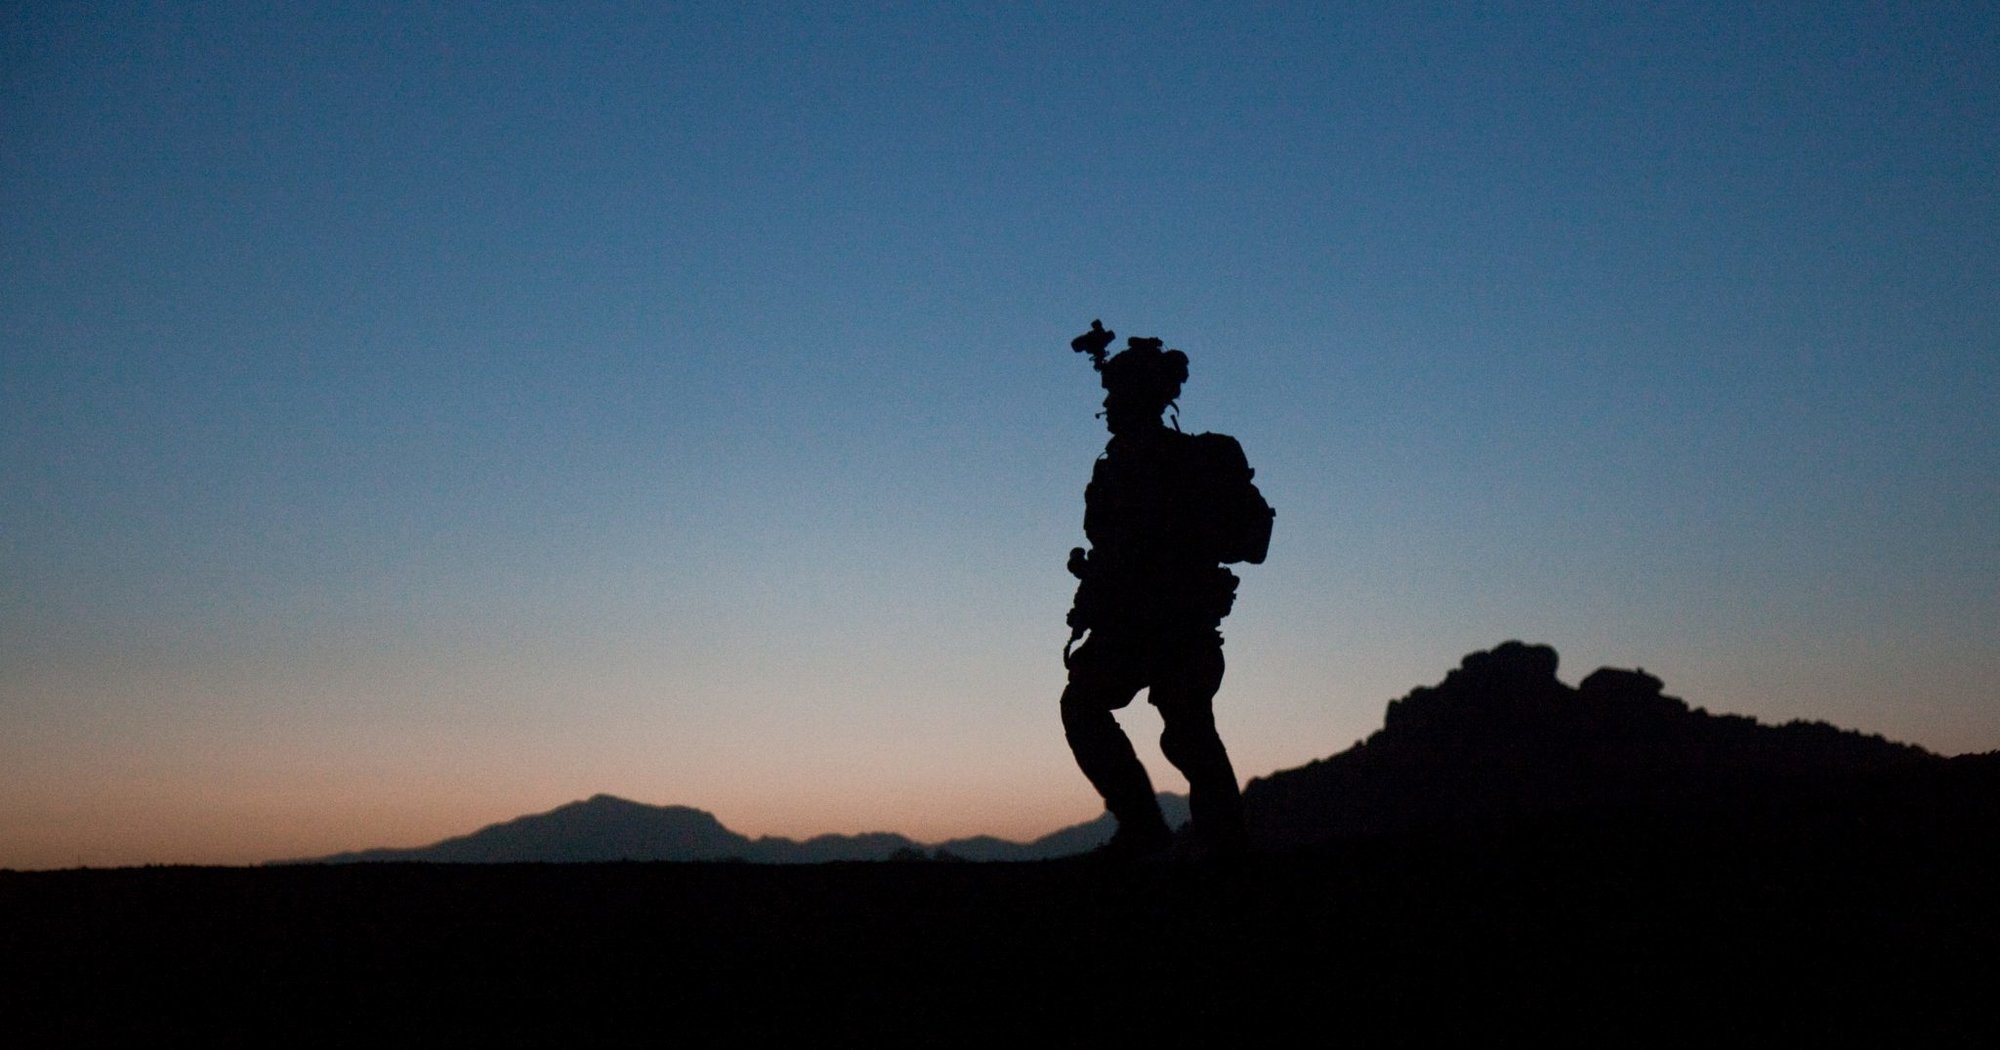 A Ranger from 3rd Battalion, 75th Ranger Regiment, on patrol in Kandahar province, Afghanistan, Feb. 26, 2011. Photo by Sgt. Brian Kohl/55th Combat Camera.